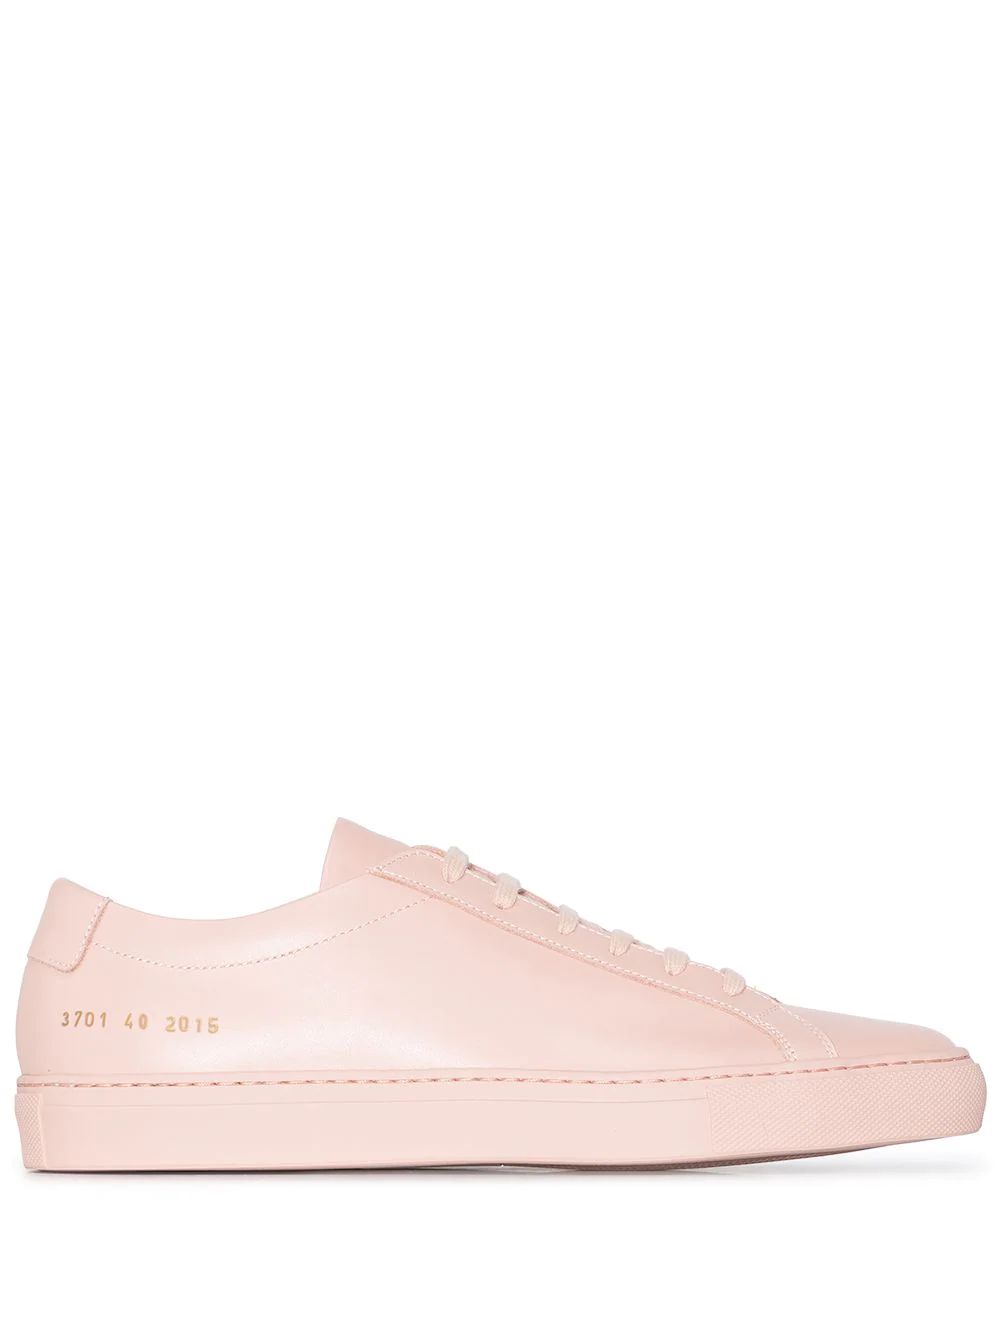 Common Projects Achilles Low Sneakers - Farfetch | Farfetch Global